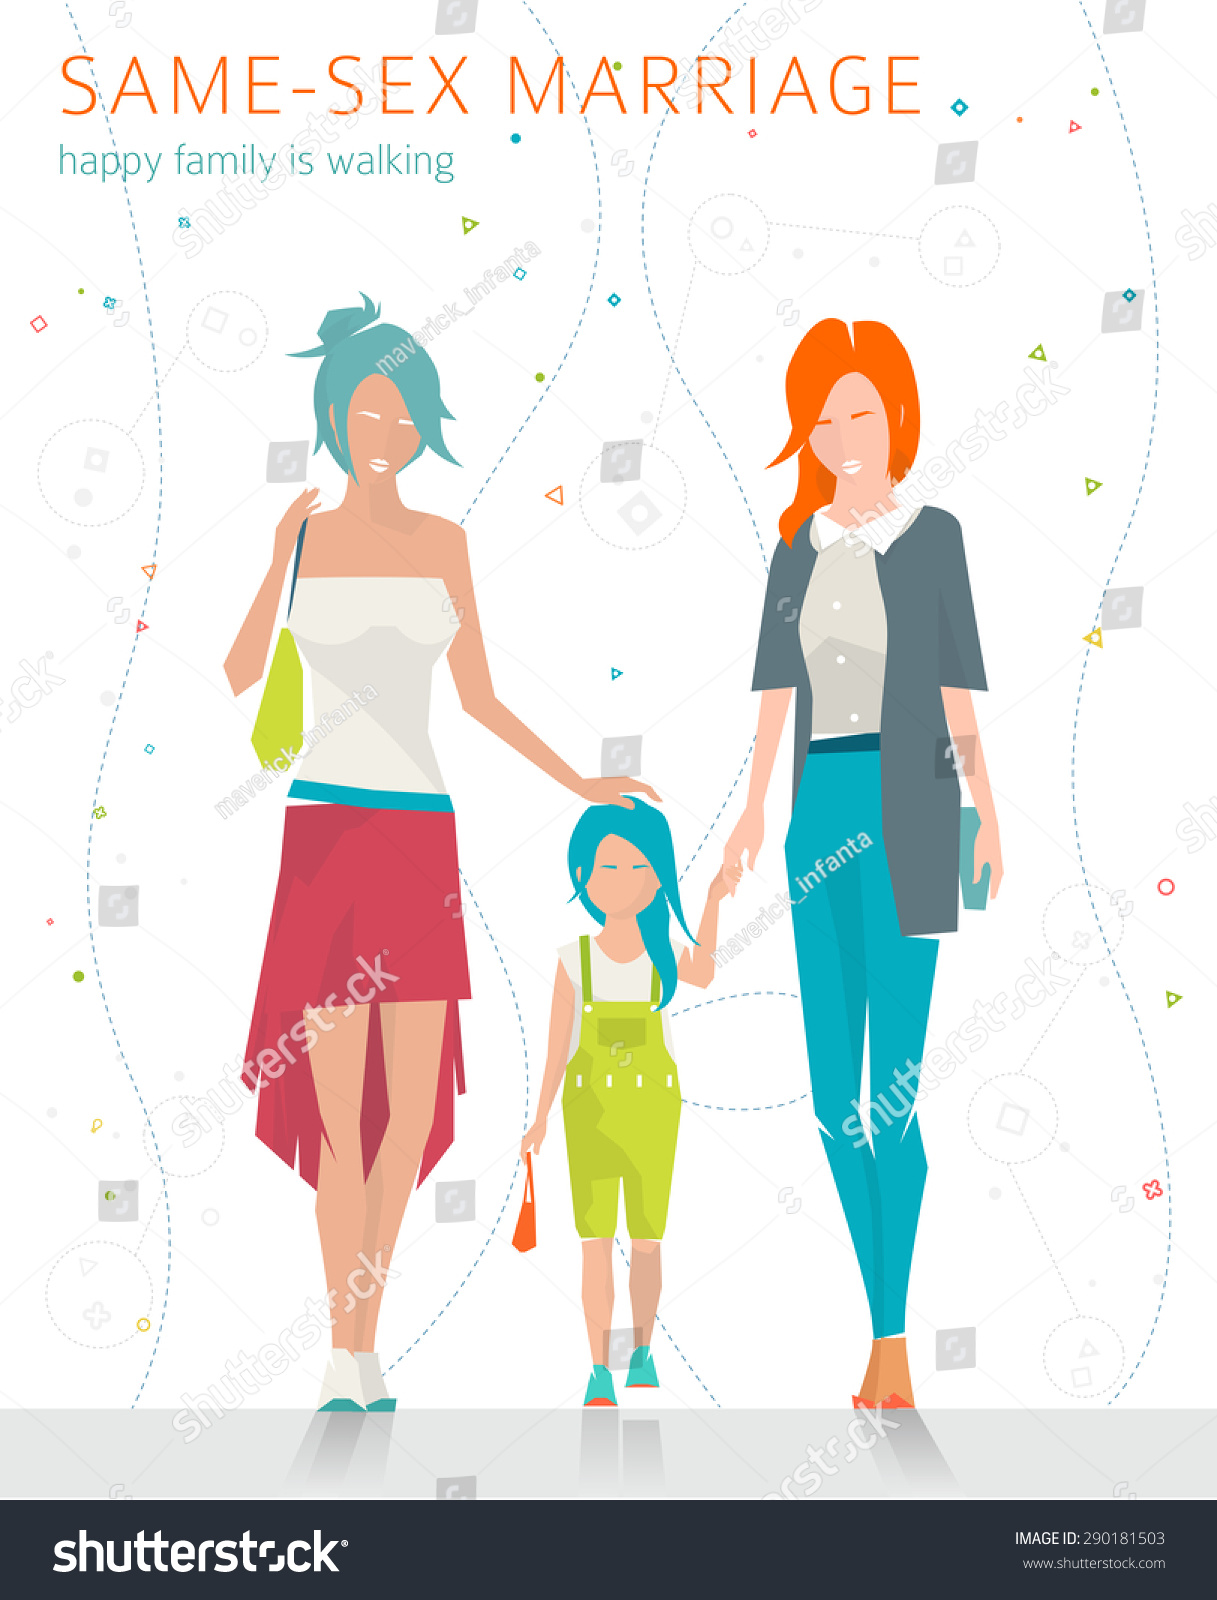 Concept of same-sex marriage. Happy family is going for a walk. Two  mothers and daughter. Flat vector illustration. #290181503